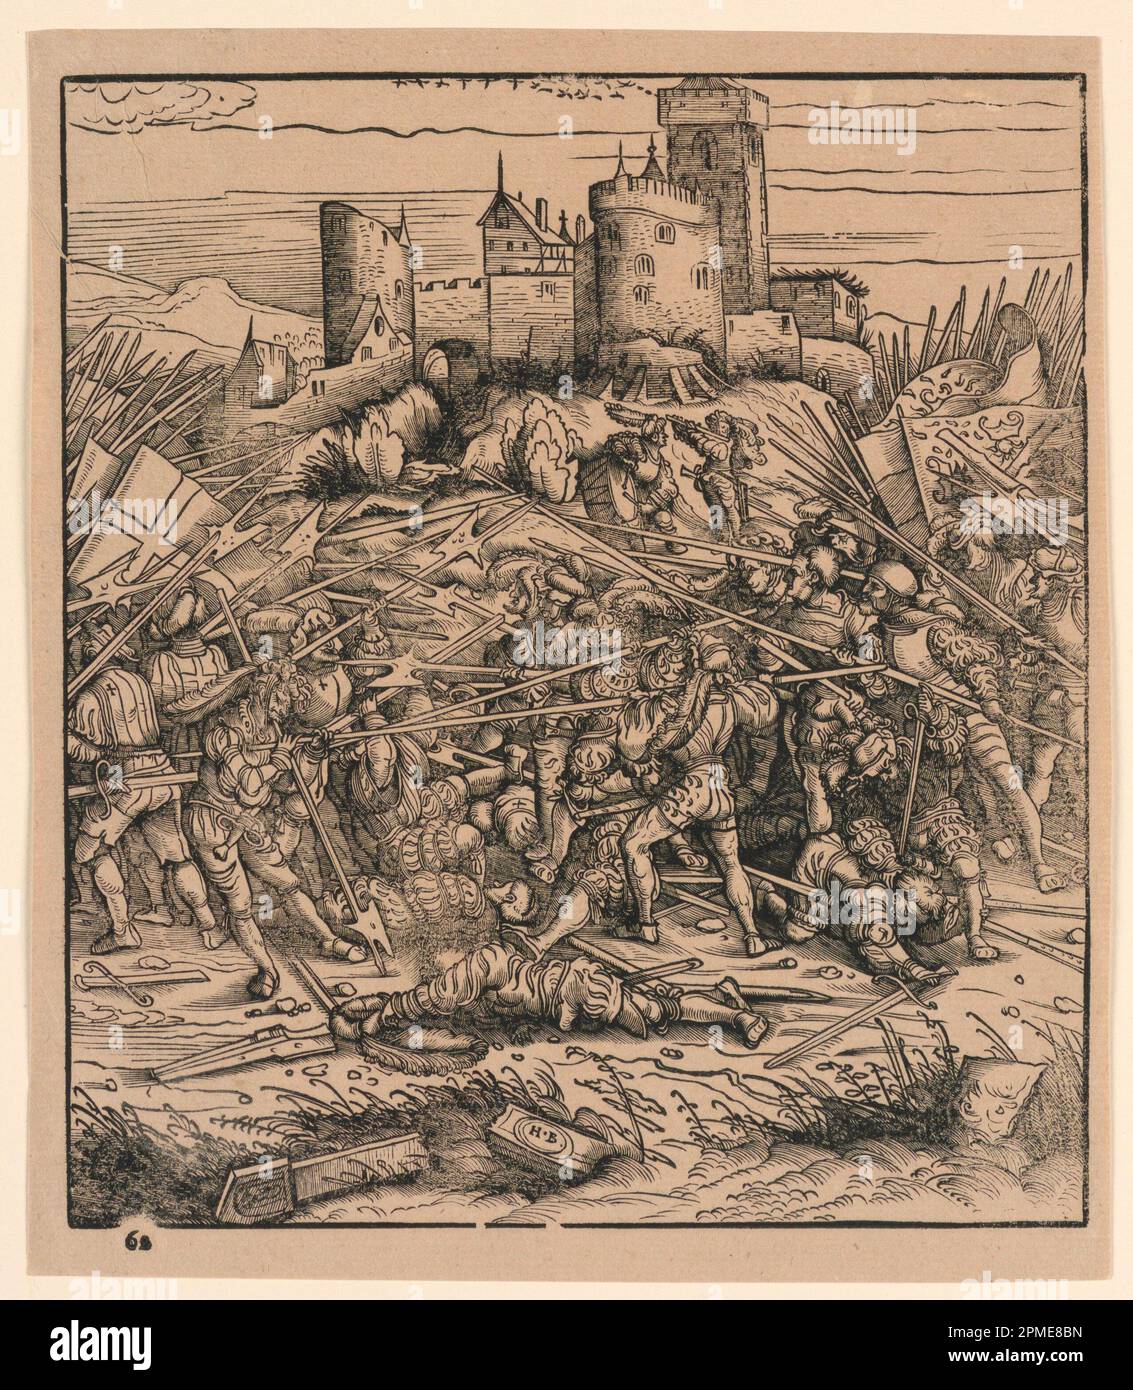 Print, The Battle at Nauders, from 'Der Weisskunig', 1775; Print Maker: Hans Burgkmair the Elder (German, 1473 – 1531); Germany; woodcut on laid paper; 23.7 × 20.5 cm (9 5/16 × 8 1/16 in.) ; Bequest of George Campbell Cooper; 1896-3-49 Stock Photo